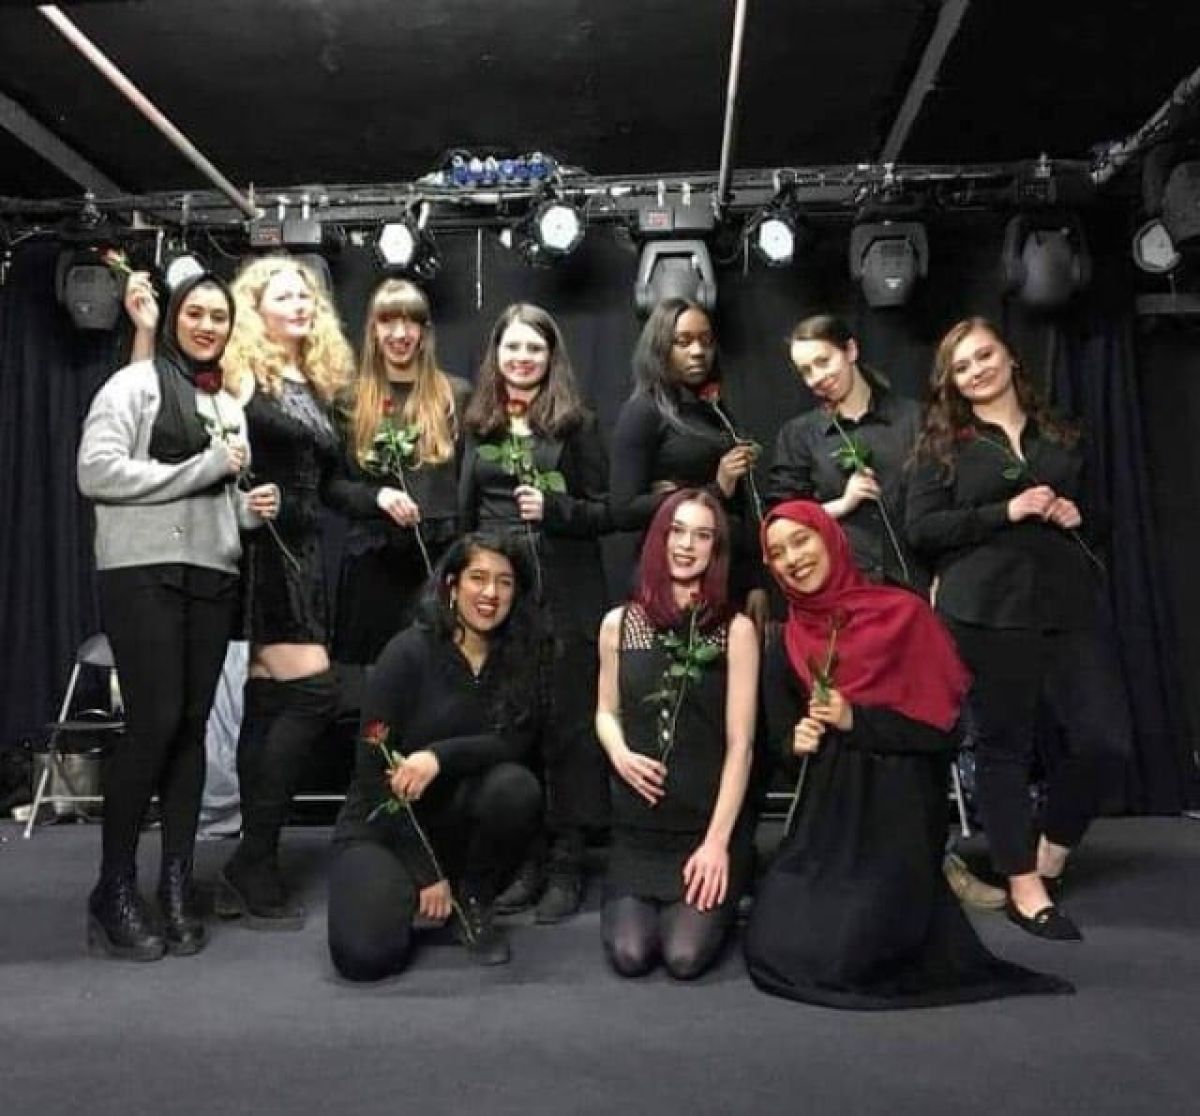 In conversation with: the Women’s Theatre Society